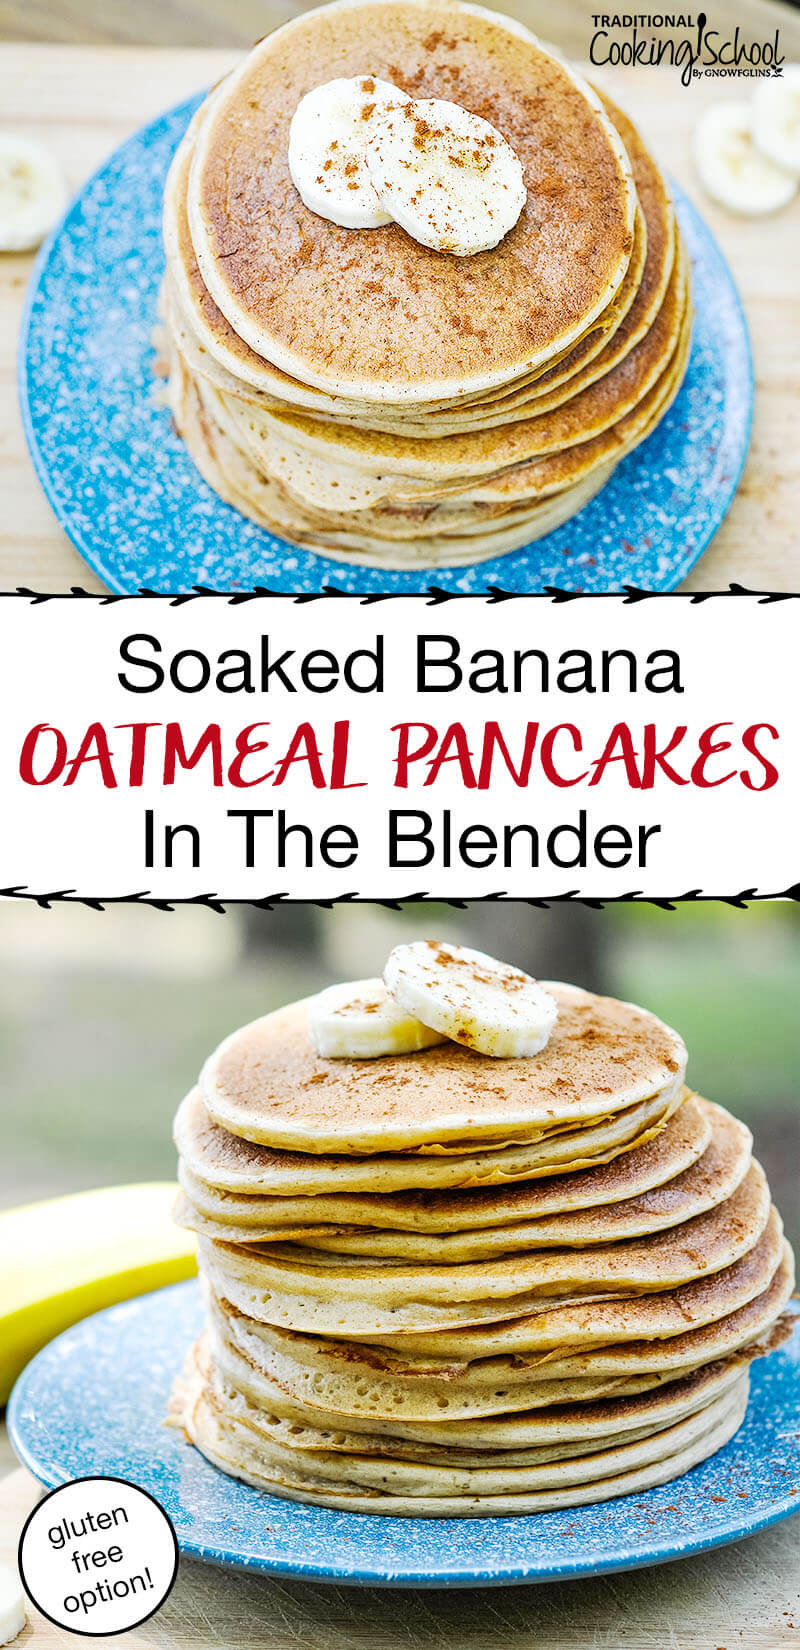 photo collage of a stack of fluffy, golden-brown pancakes on a blue speckled plate with banana slices and a sprinkling of ground cinnamon for garnish, with text overlay: "Soaked Banana Oatmeal Pancakes In The Blender (gluten-free option!)"